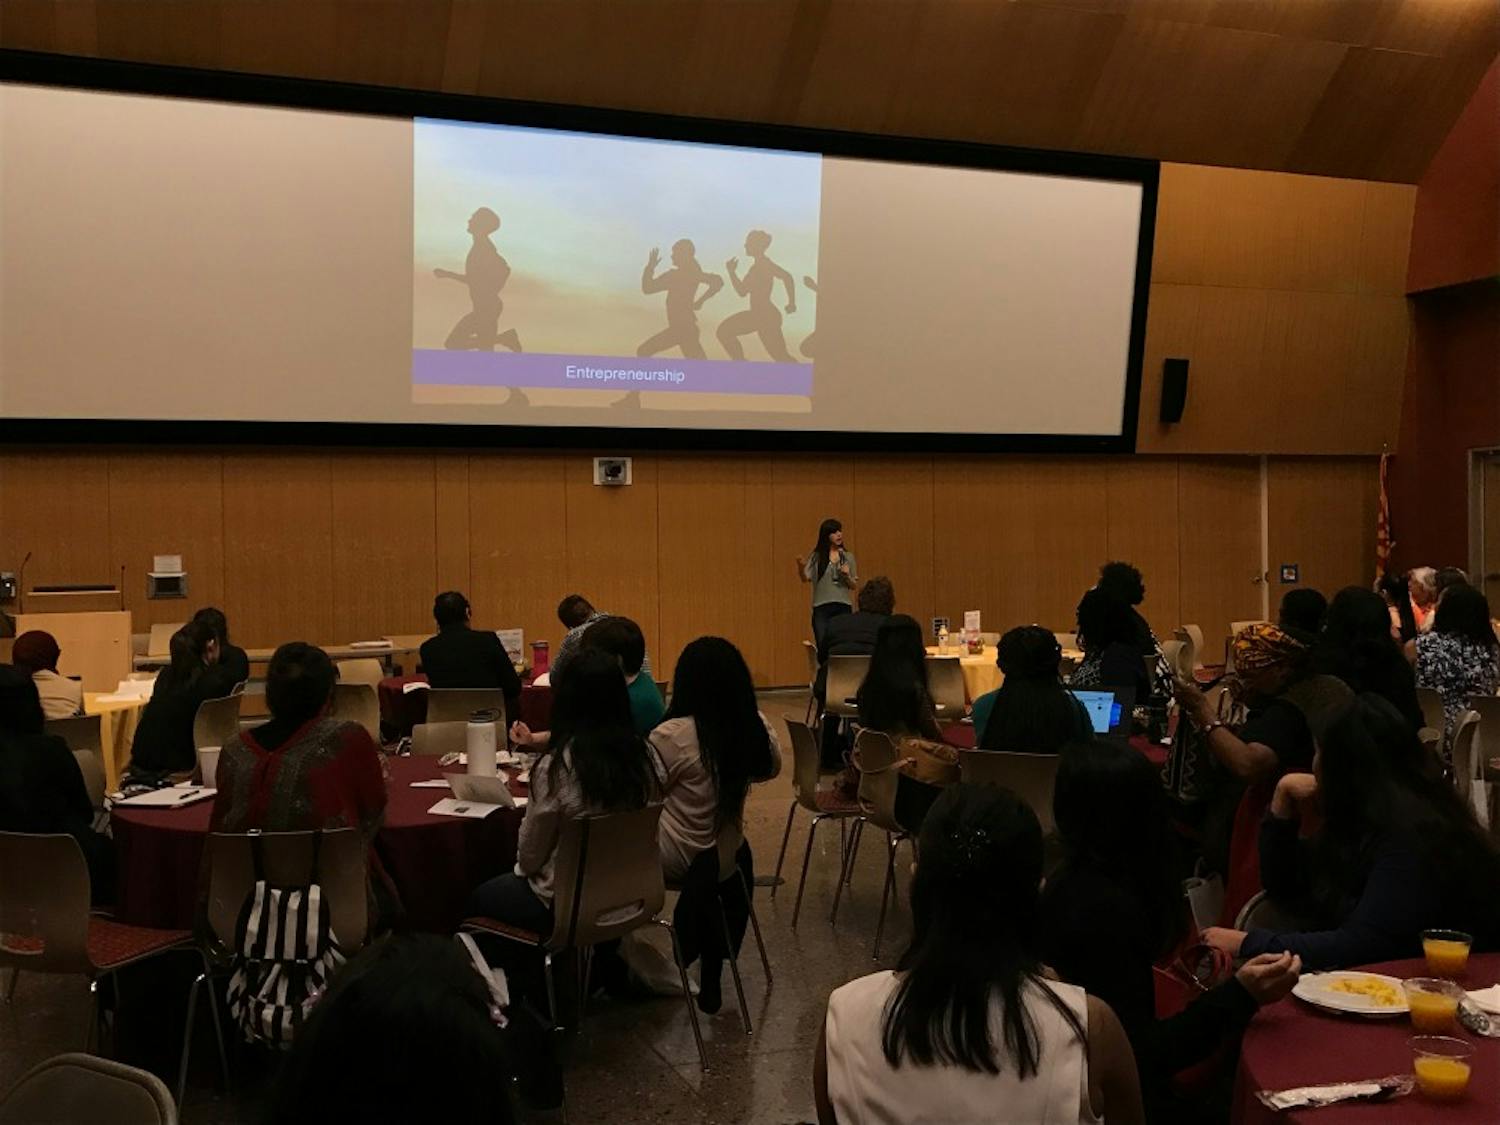 A group of listeners hearing from Laura Gomez, CEO and founder of Atipica, who delivered an inspiring talk at GateWay Community College during the Women of Color STEM Entrepreneurship Conference on Friday, March 24, 2017.